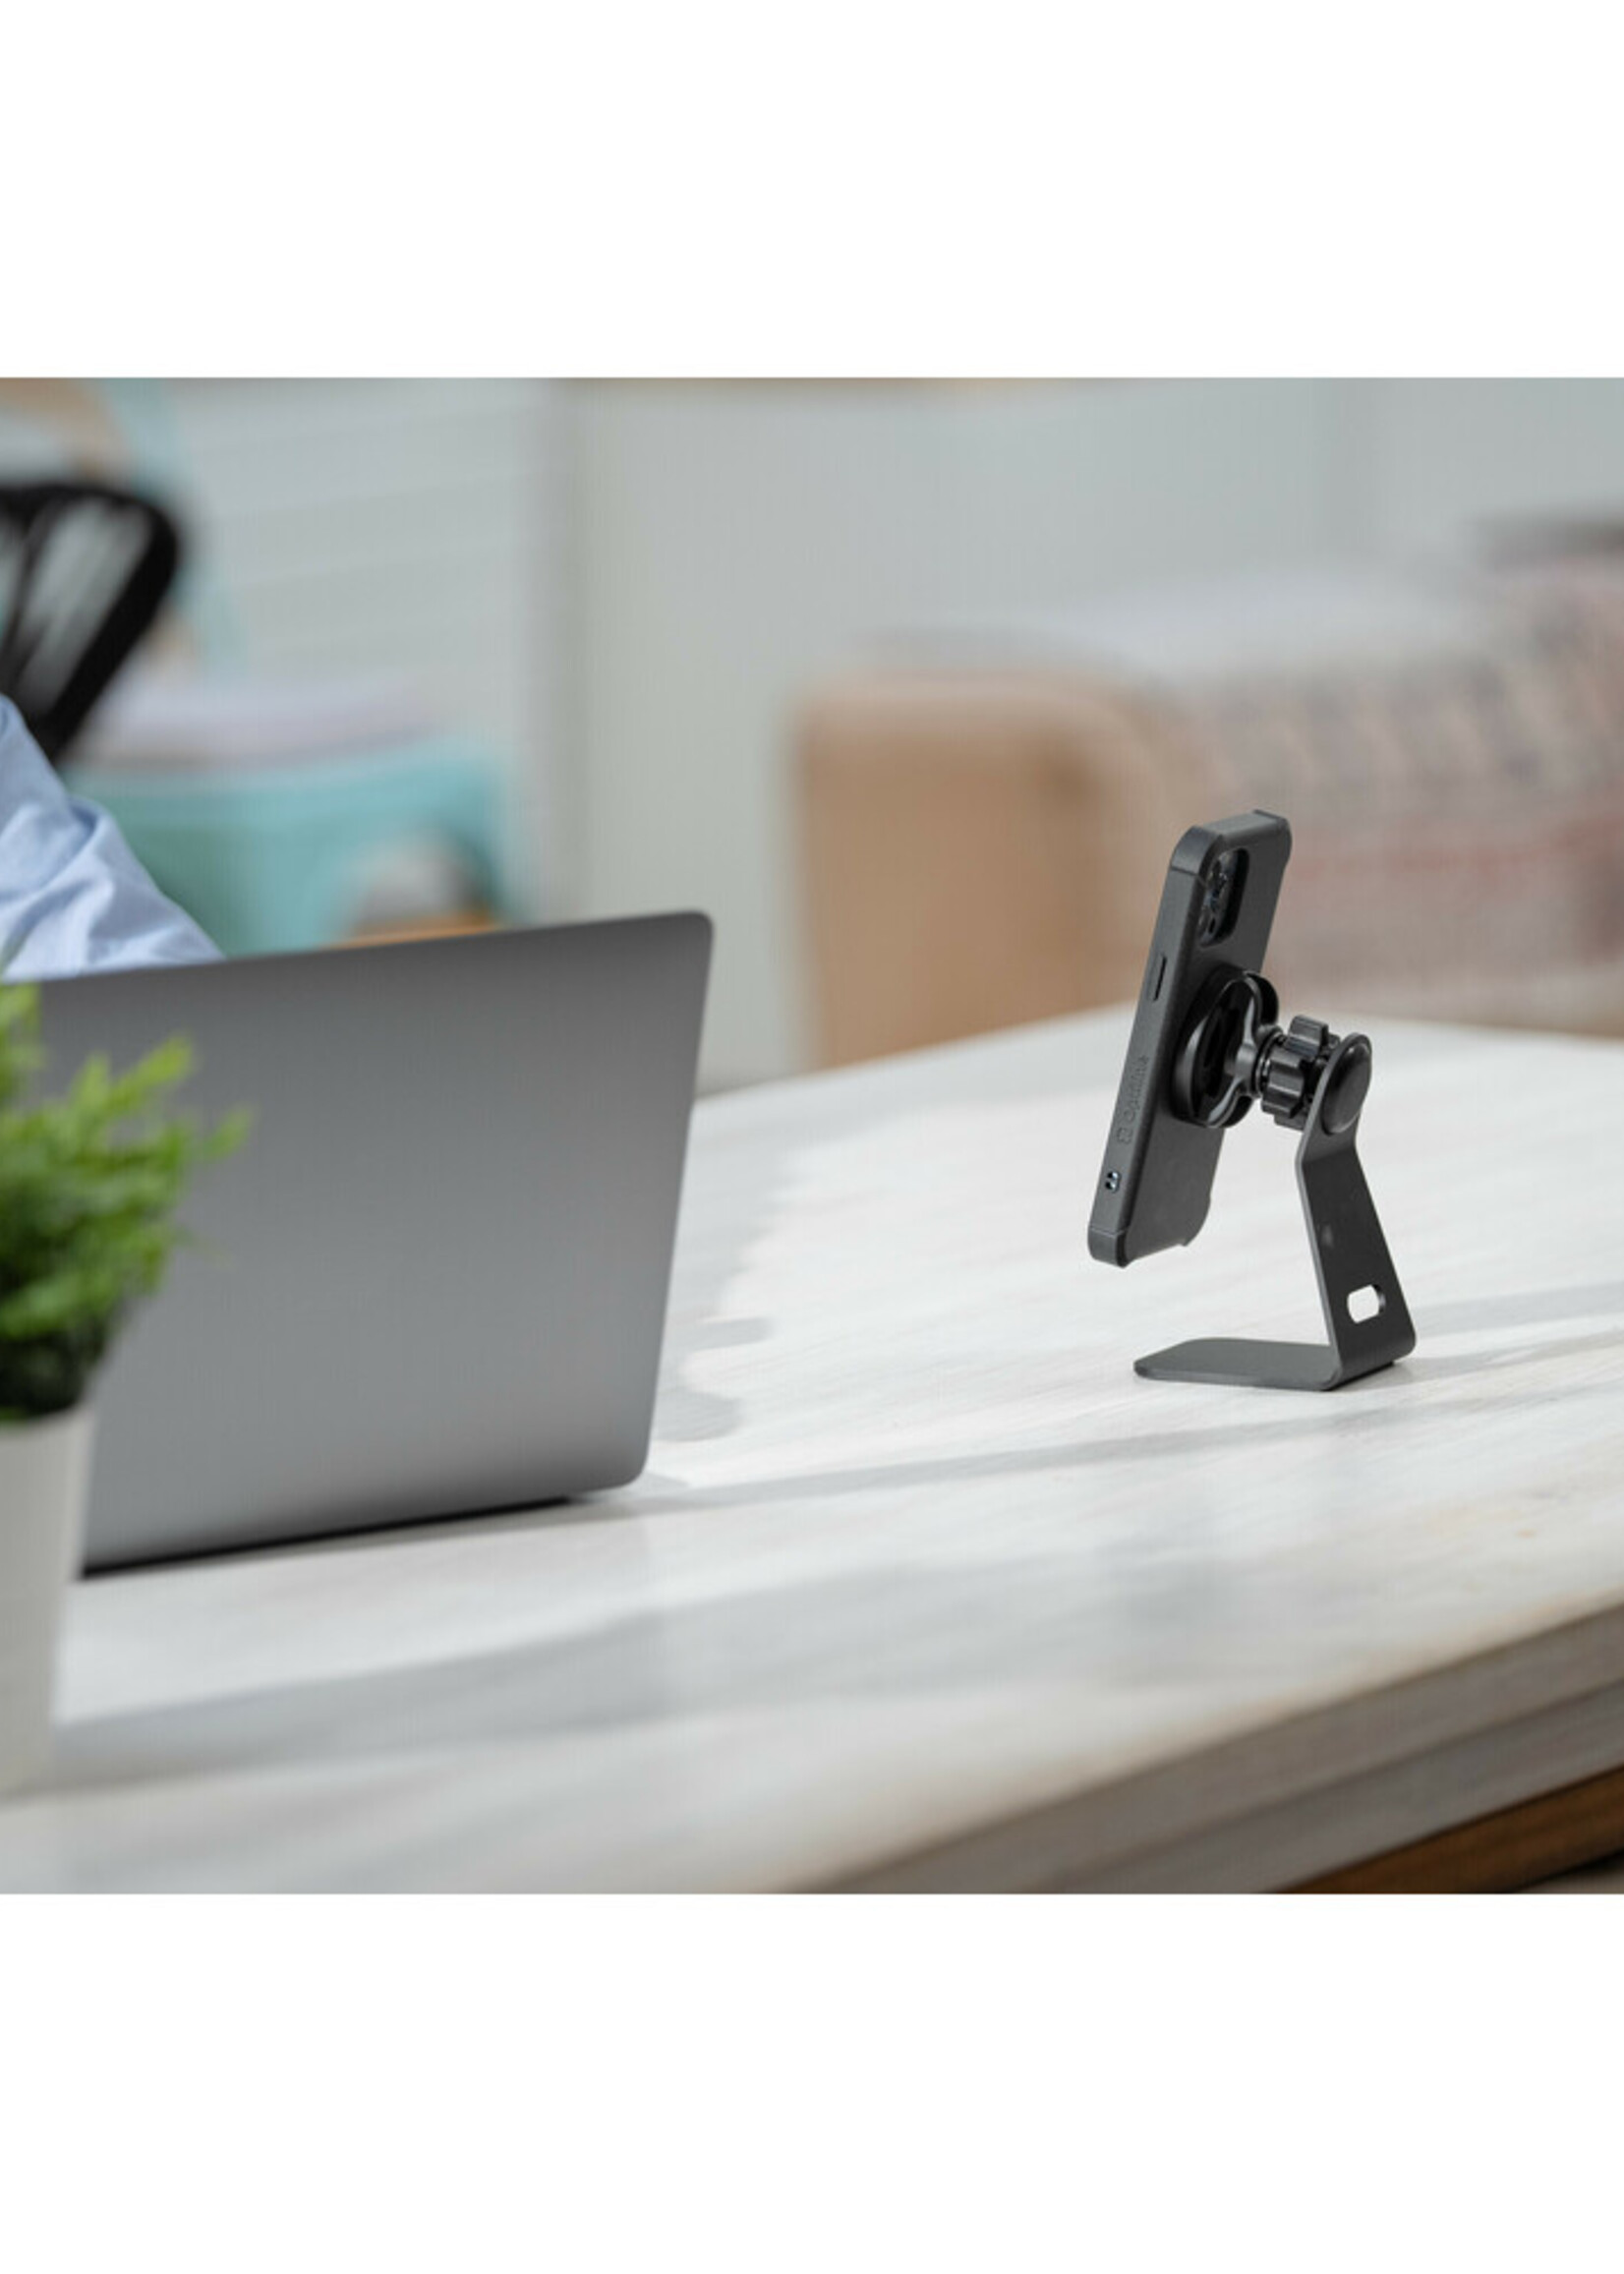 Optiline Mag Pro Stand, magnetic home / office mount